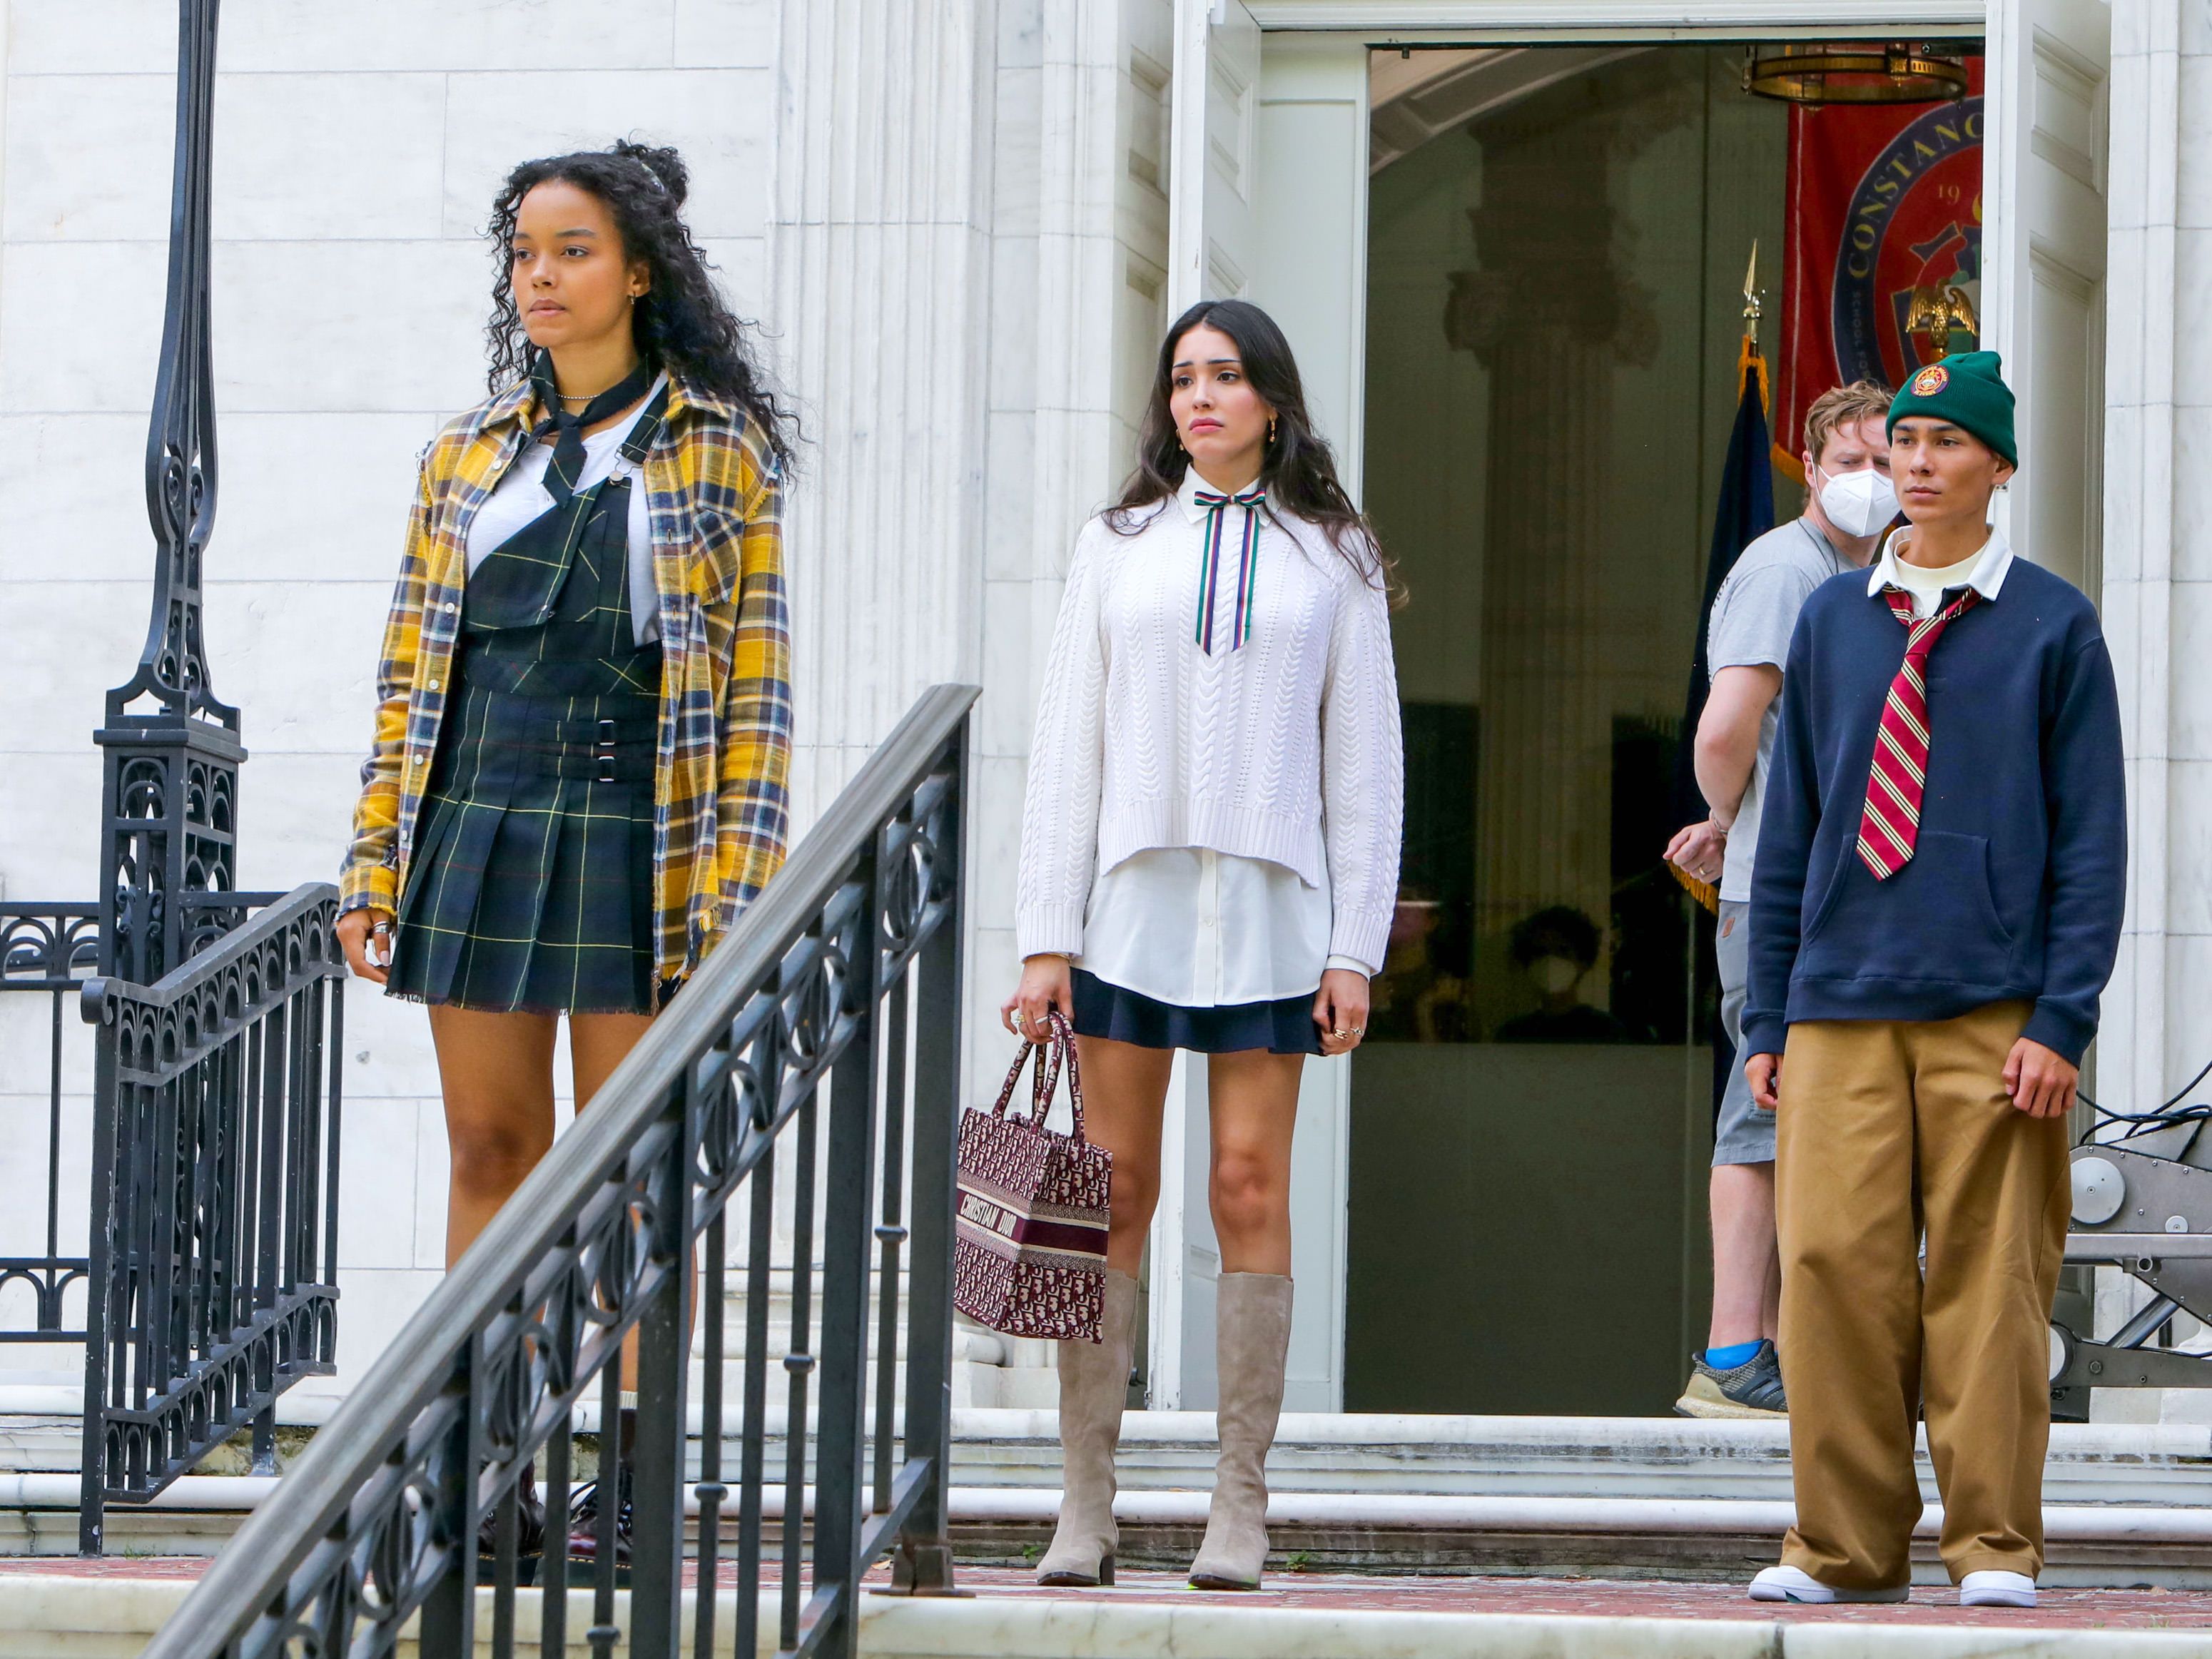 Steal the Look: Dress Like Your Fave Gossip Girl Reboot Character